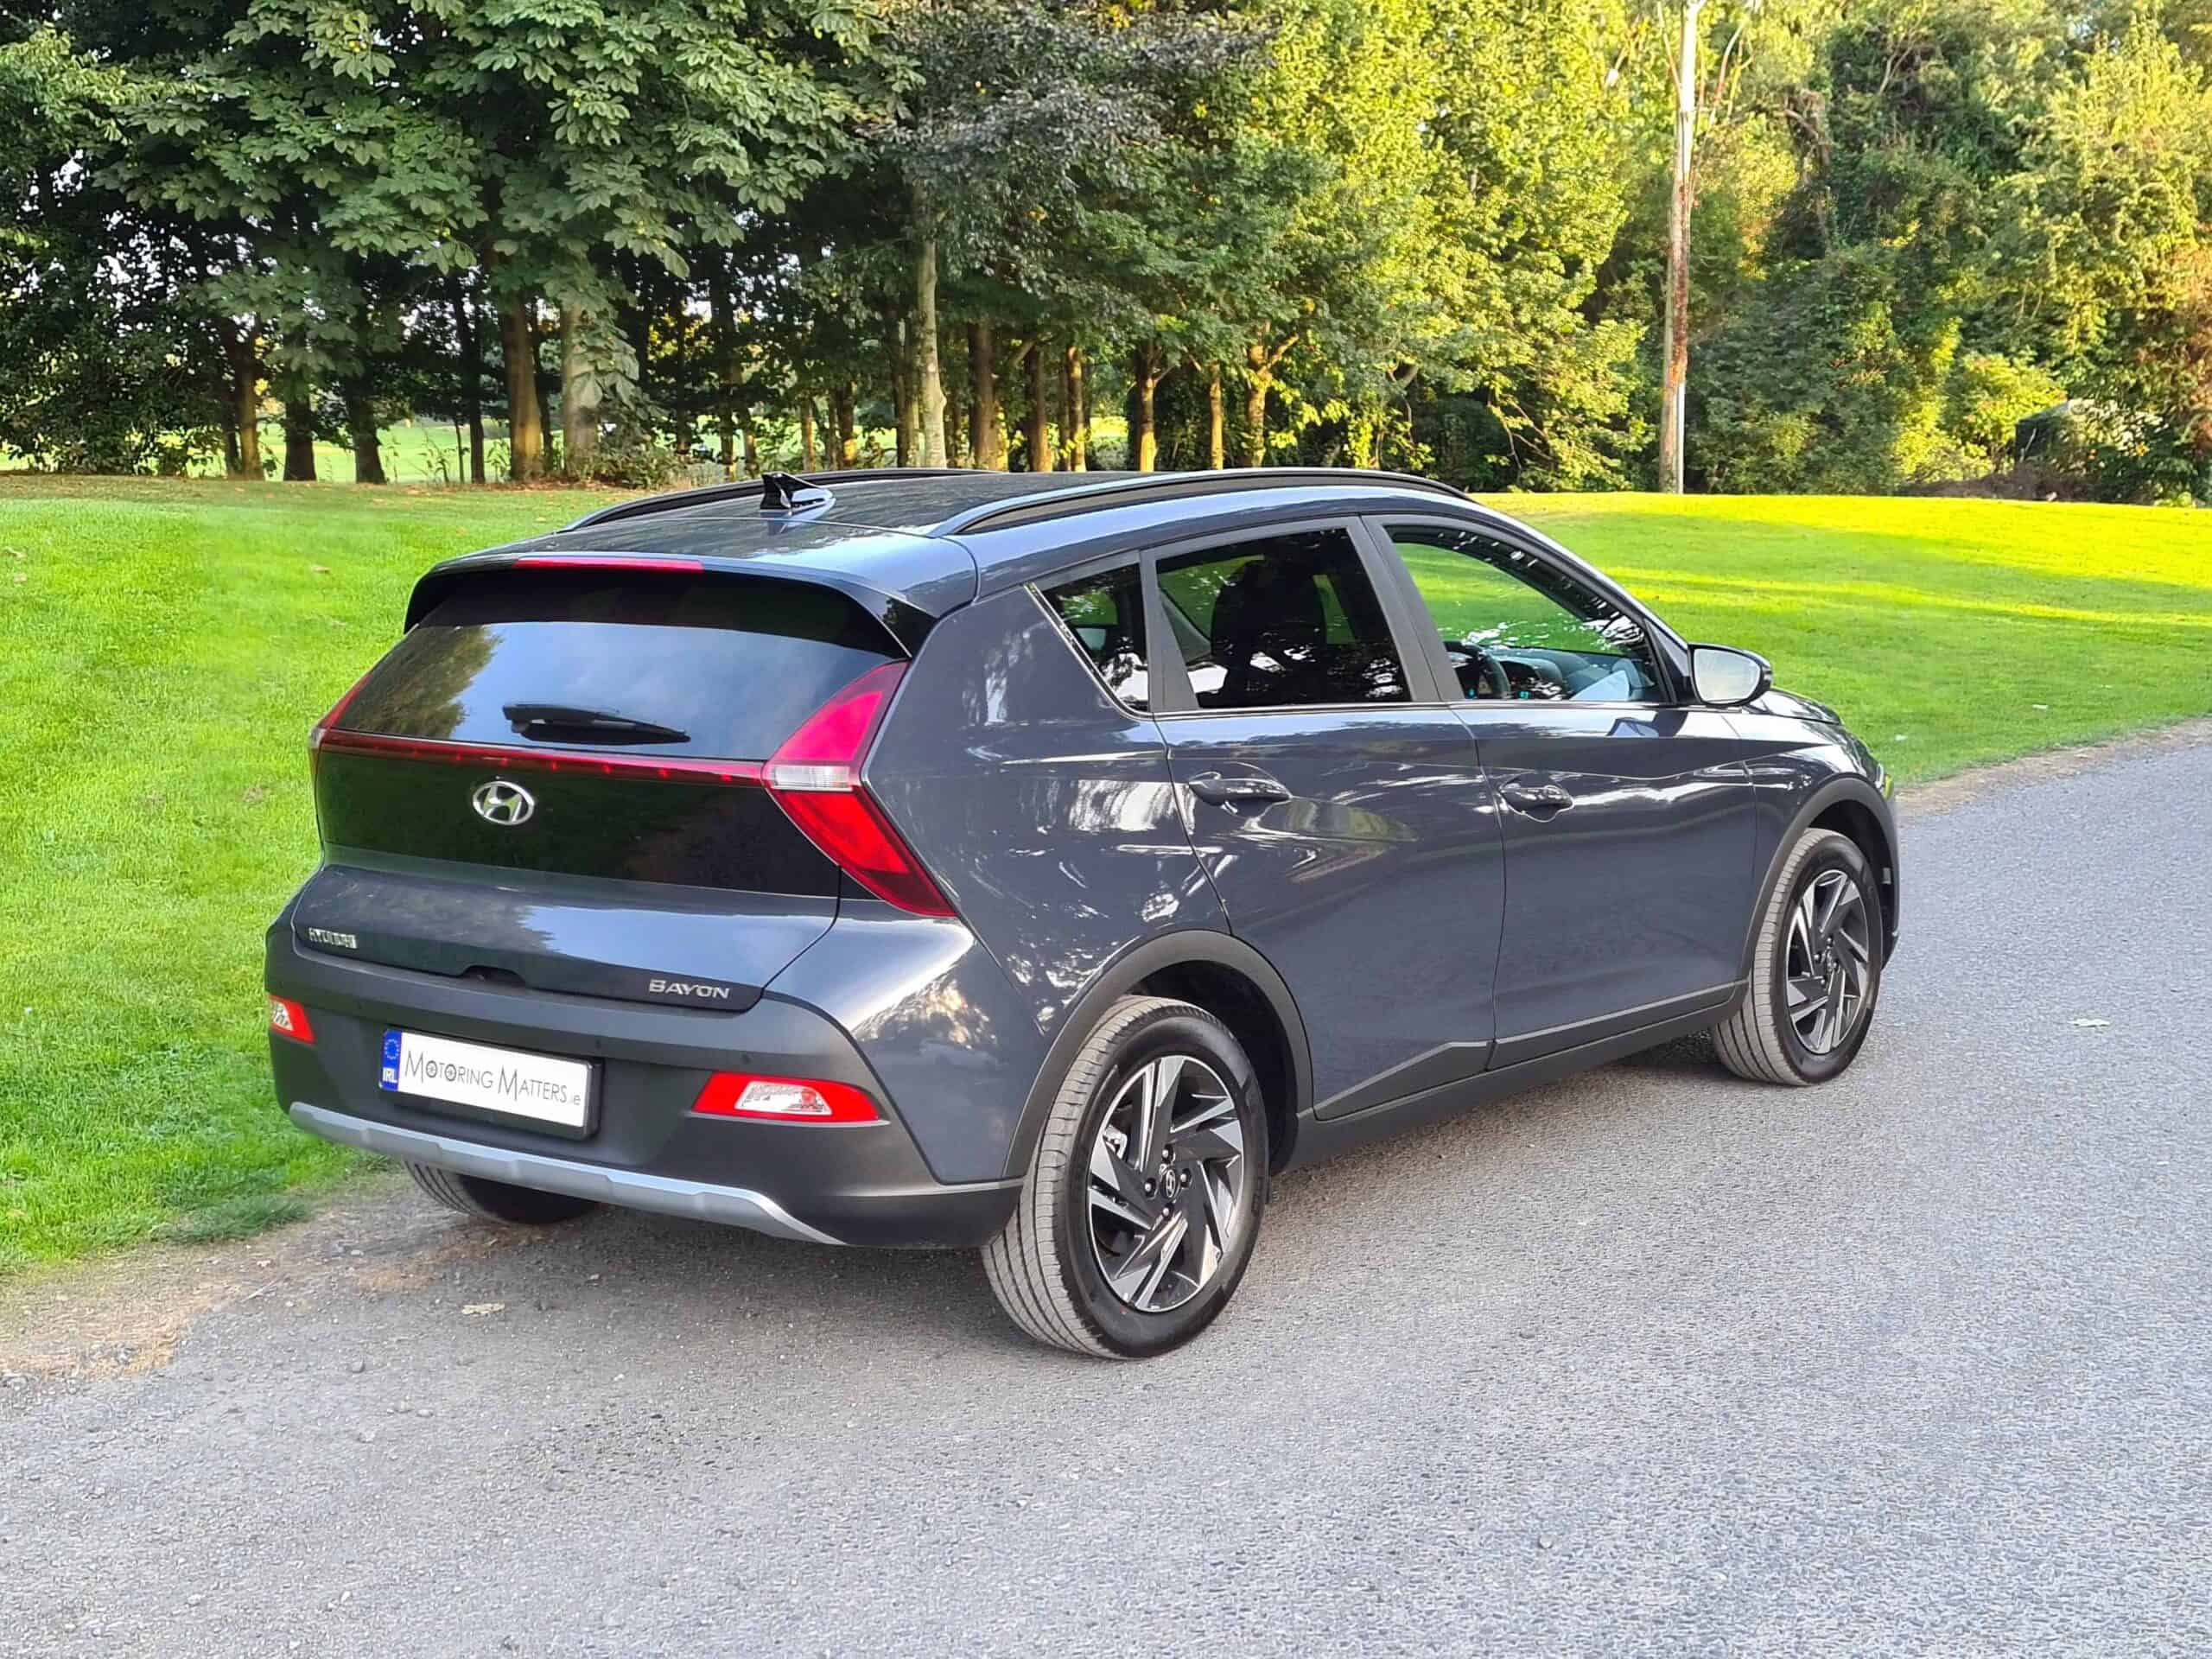 Motoring Review: Little and large from new Hyundai Bayon - Waterford Live